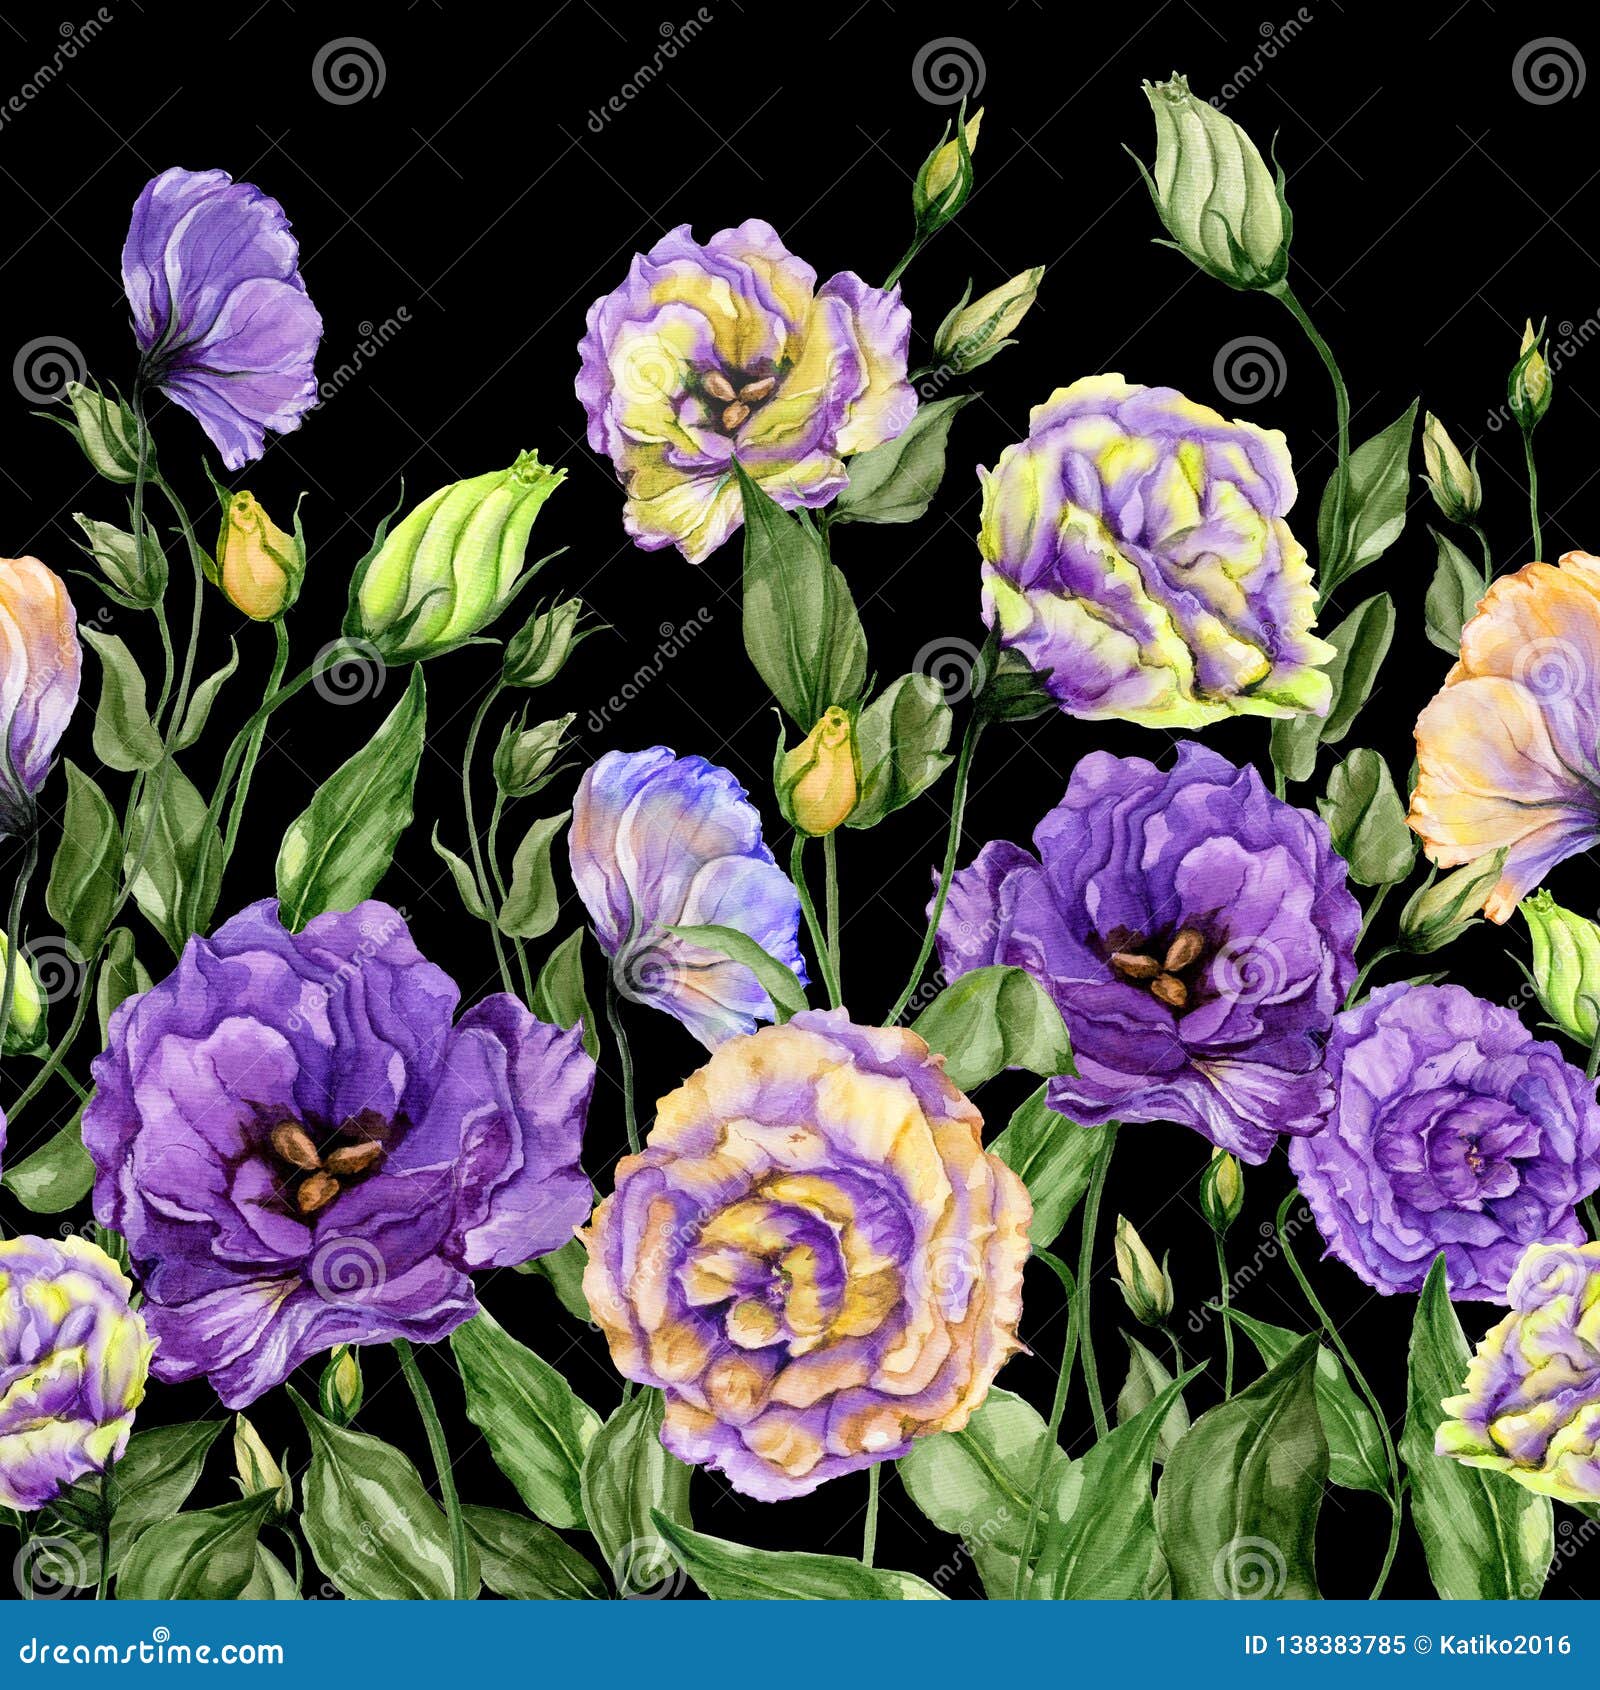 beautiful lisianthus flowers with green leaves on black background. seamless floral pattern. watercolor painting.